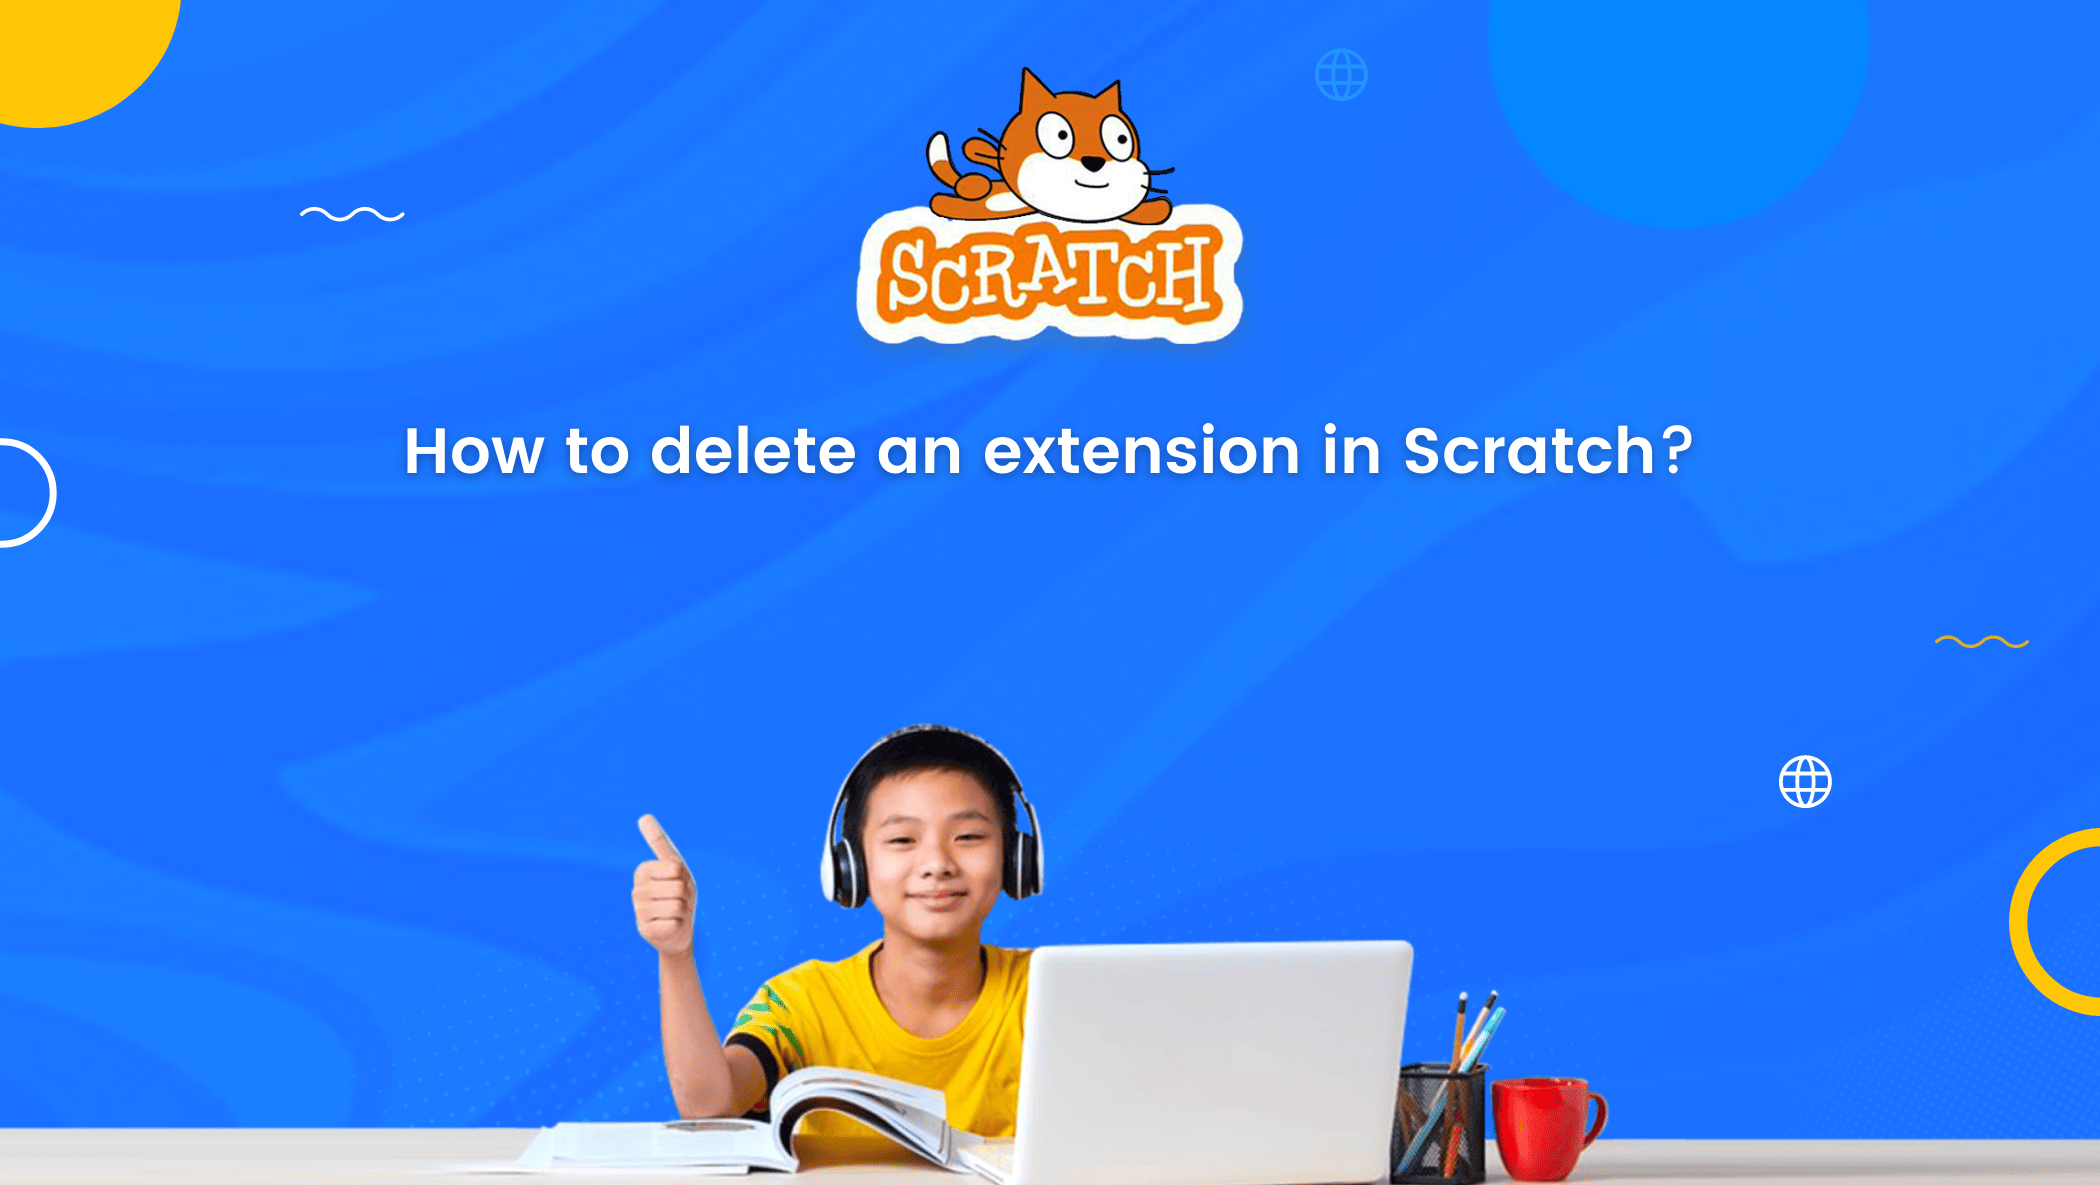 How to delete an extension in Scratch